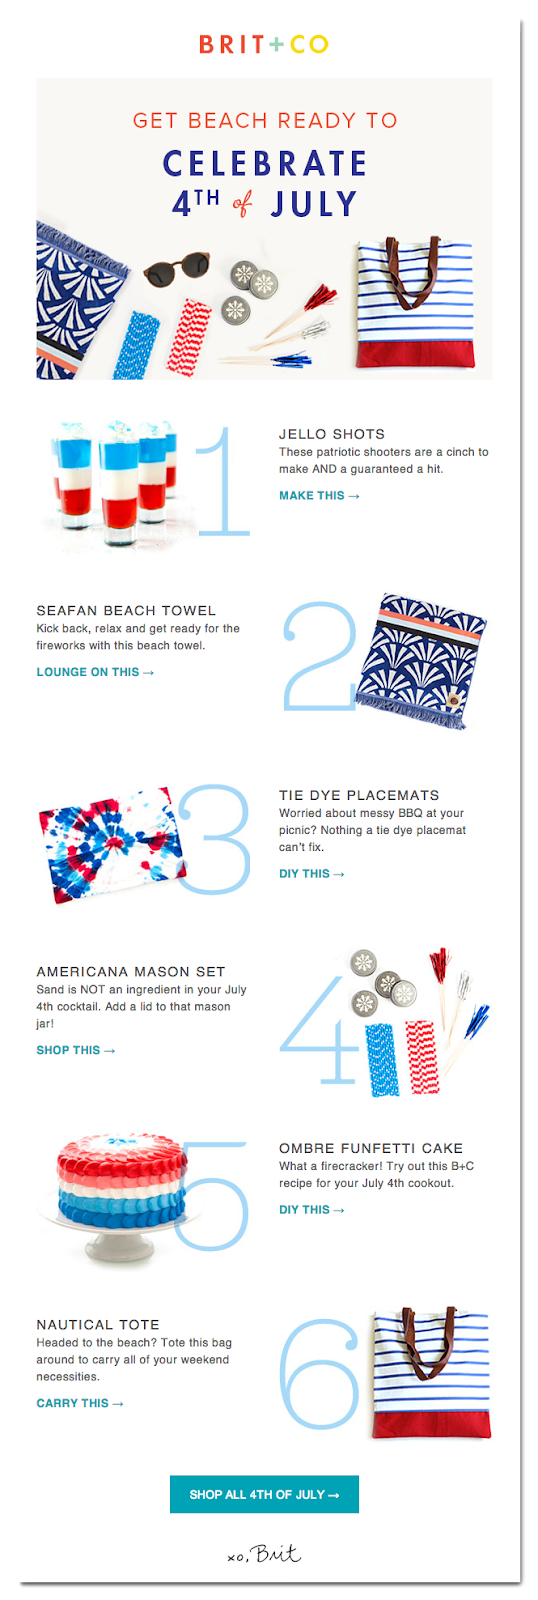 4th of July email subject lines | Brit+Co